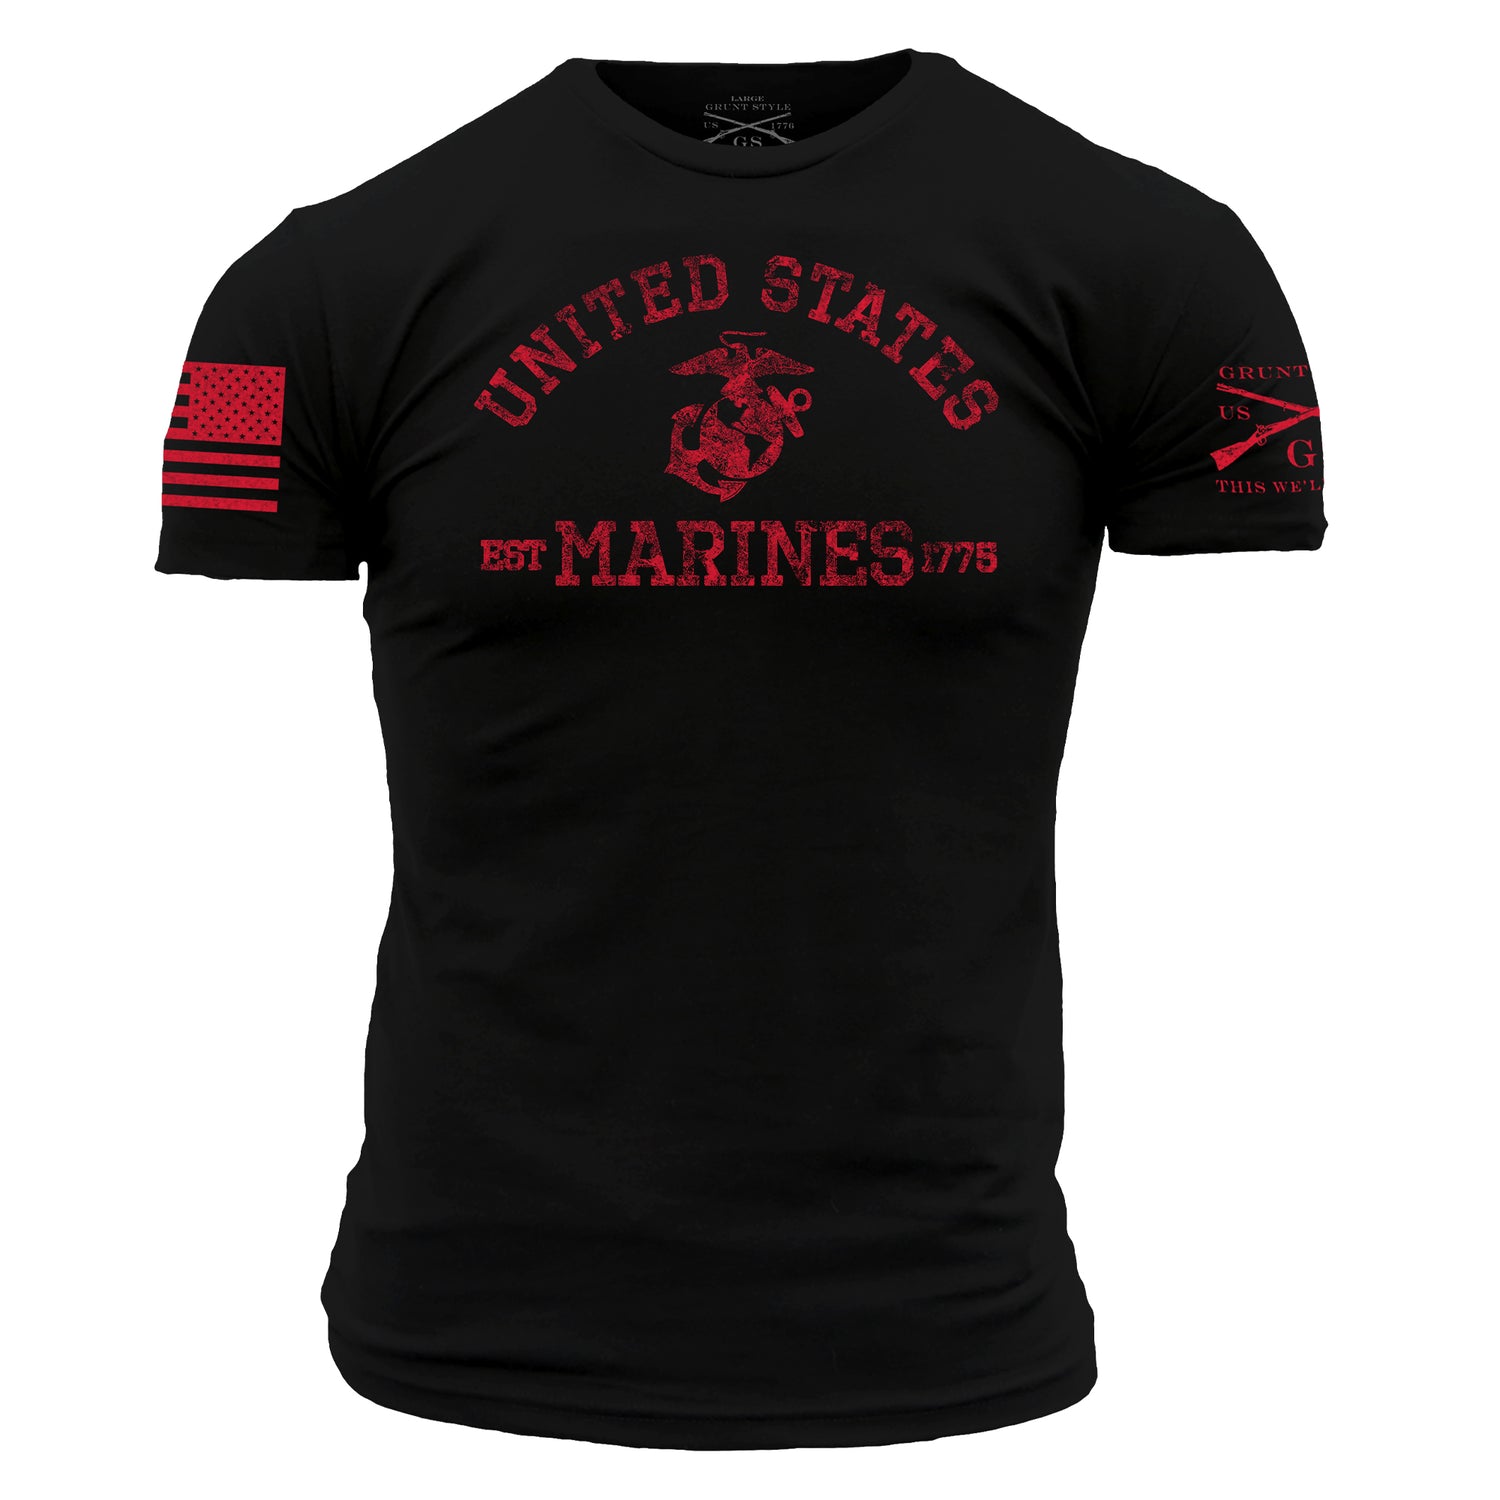 USMC Est. 1775 Tee for Men Black and Red | Grunt Style 